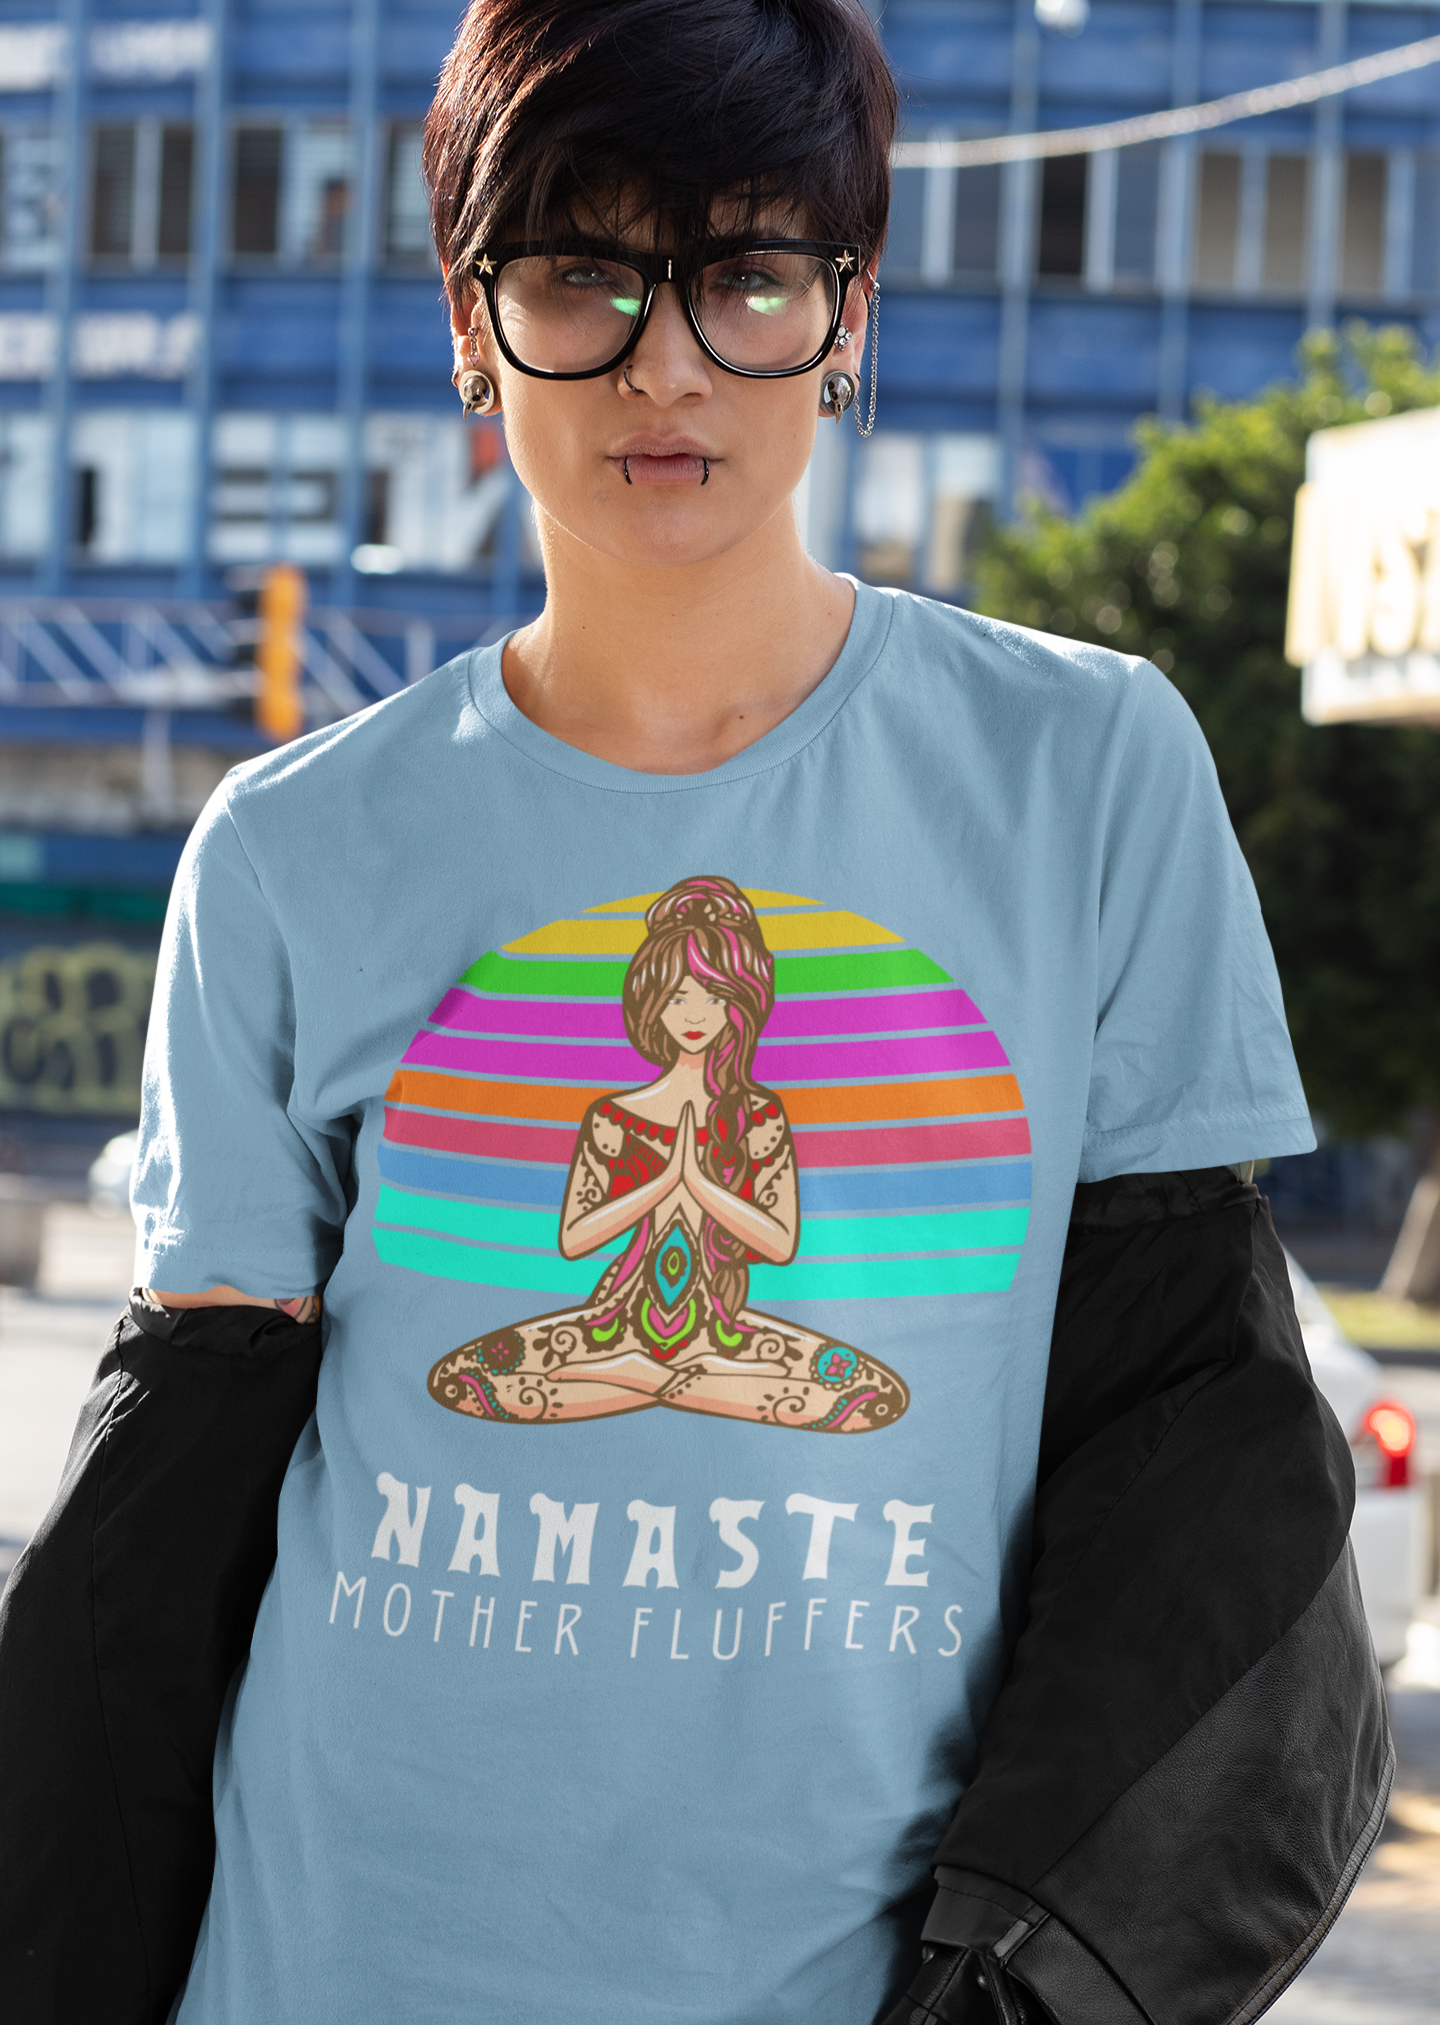 Namaste Mother Fluffers Funny Softstyle Tee